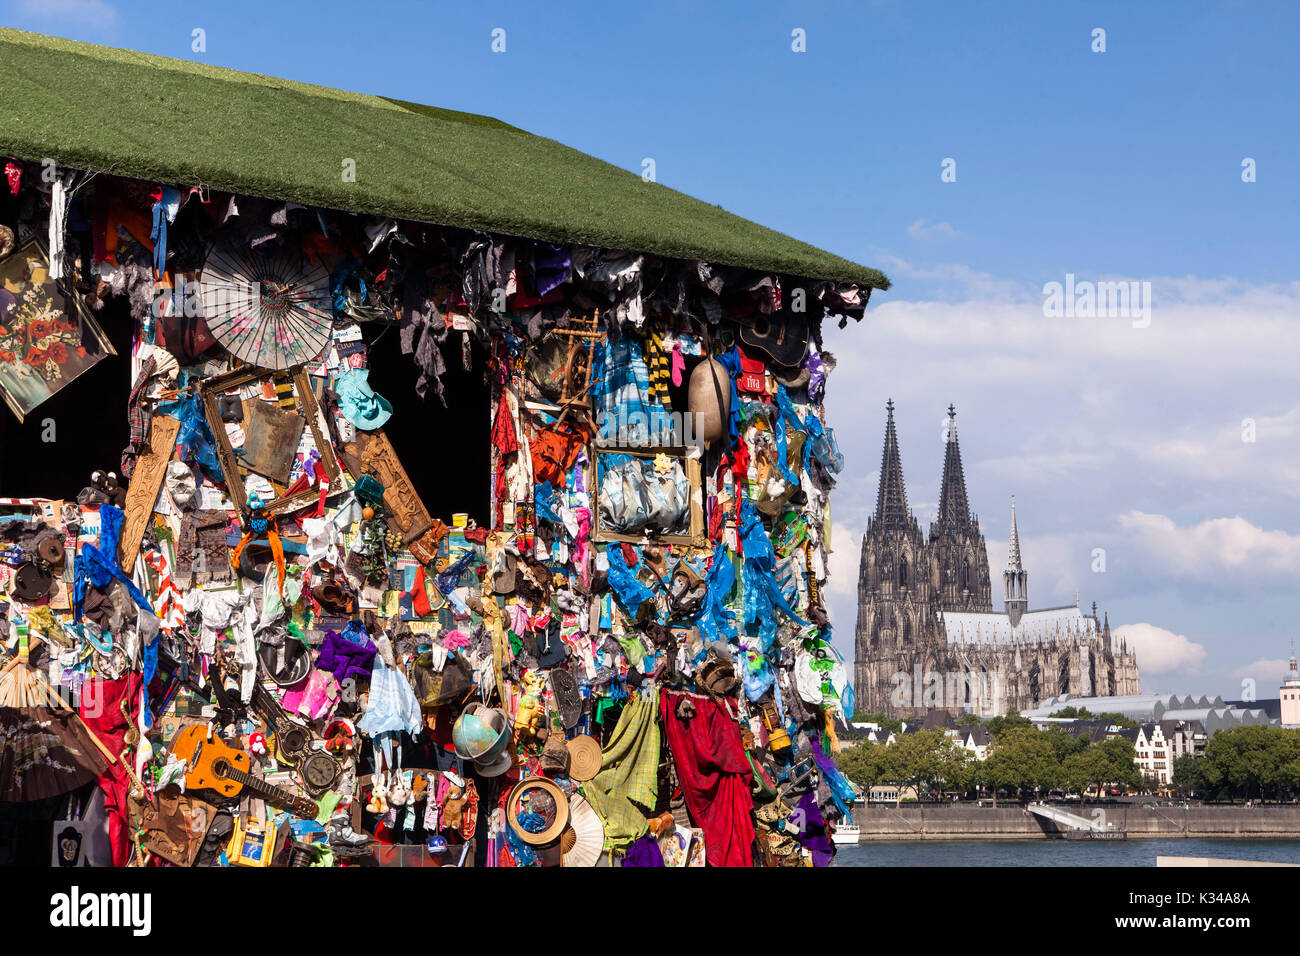 Germany, Cologne, the trash house of the artist H.A. Schult on the banks of the river Rhine in the district Deutz, the 'Save the World Hotel' is inten Stock Photo